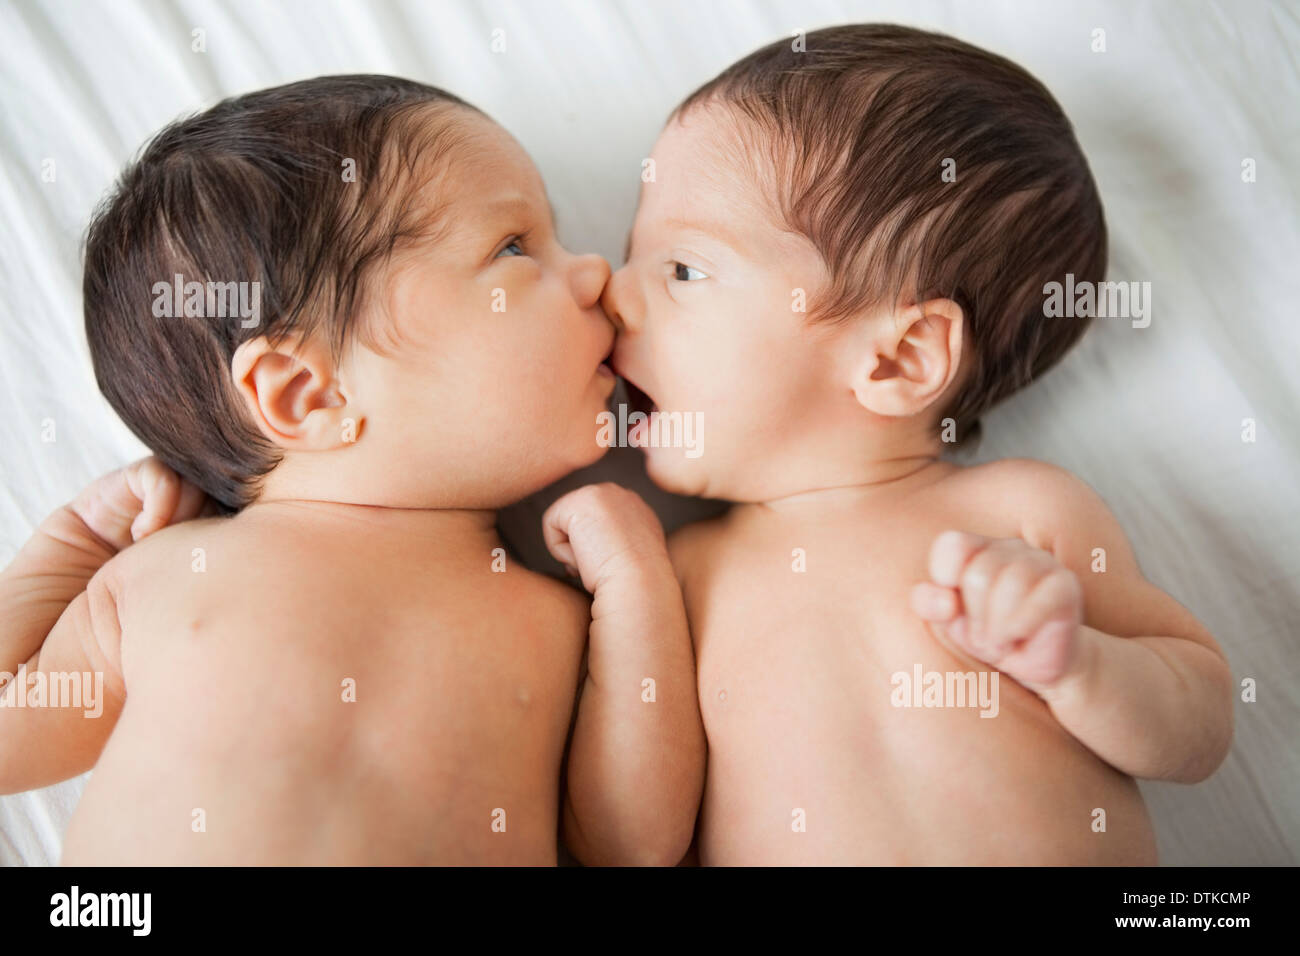 Twin baby girls kissing on bed Stock Photo